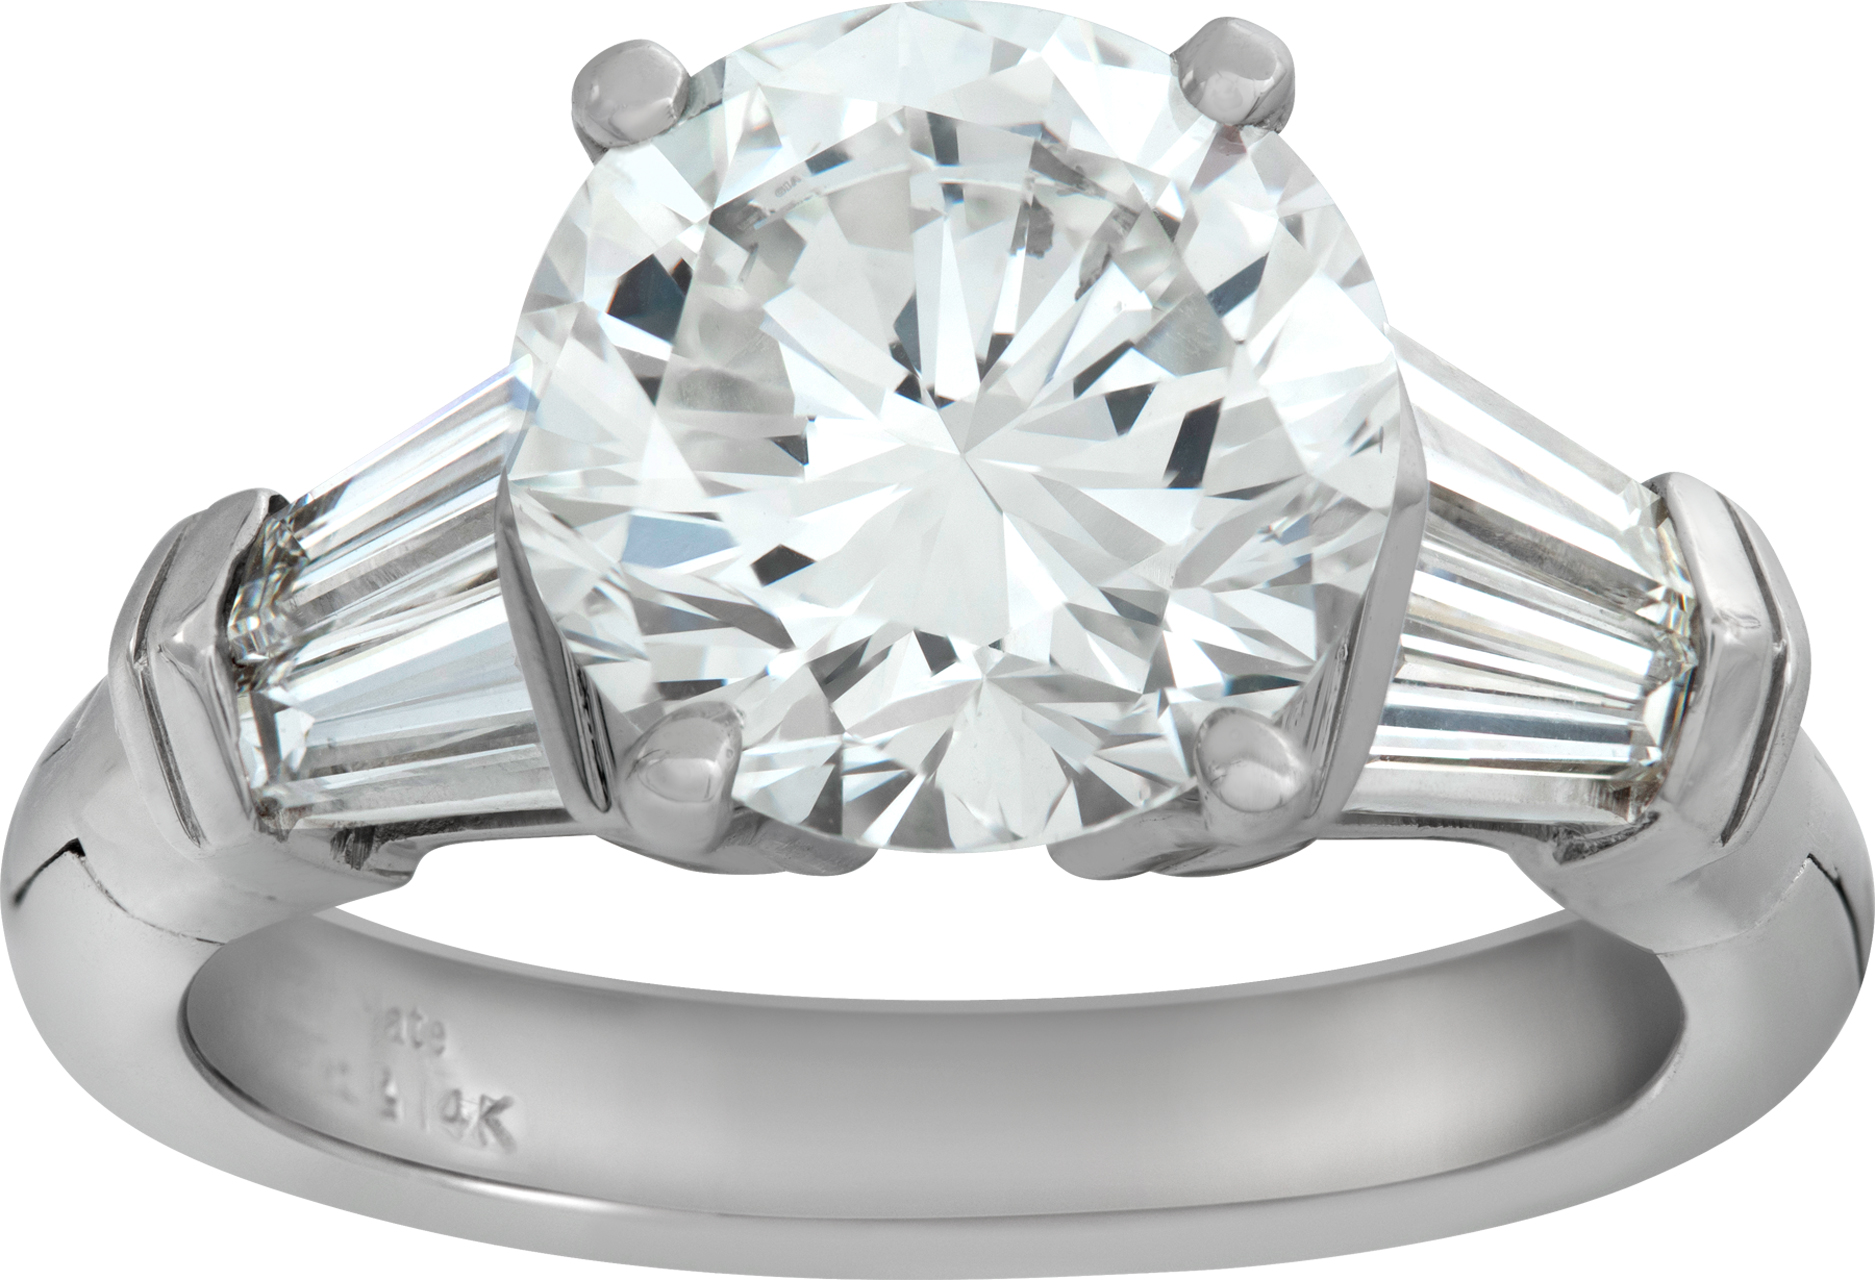 GIA Certified round brilliant cut 3.09 carat diamond, H Color, VS2 clarity set on a "FINGER MATE" platinum & 14K white gold setting with 4 tapered baguettes